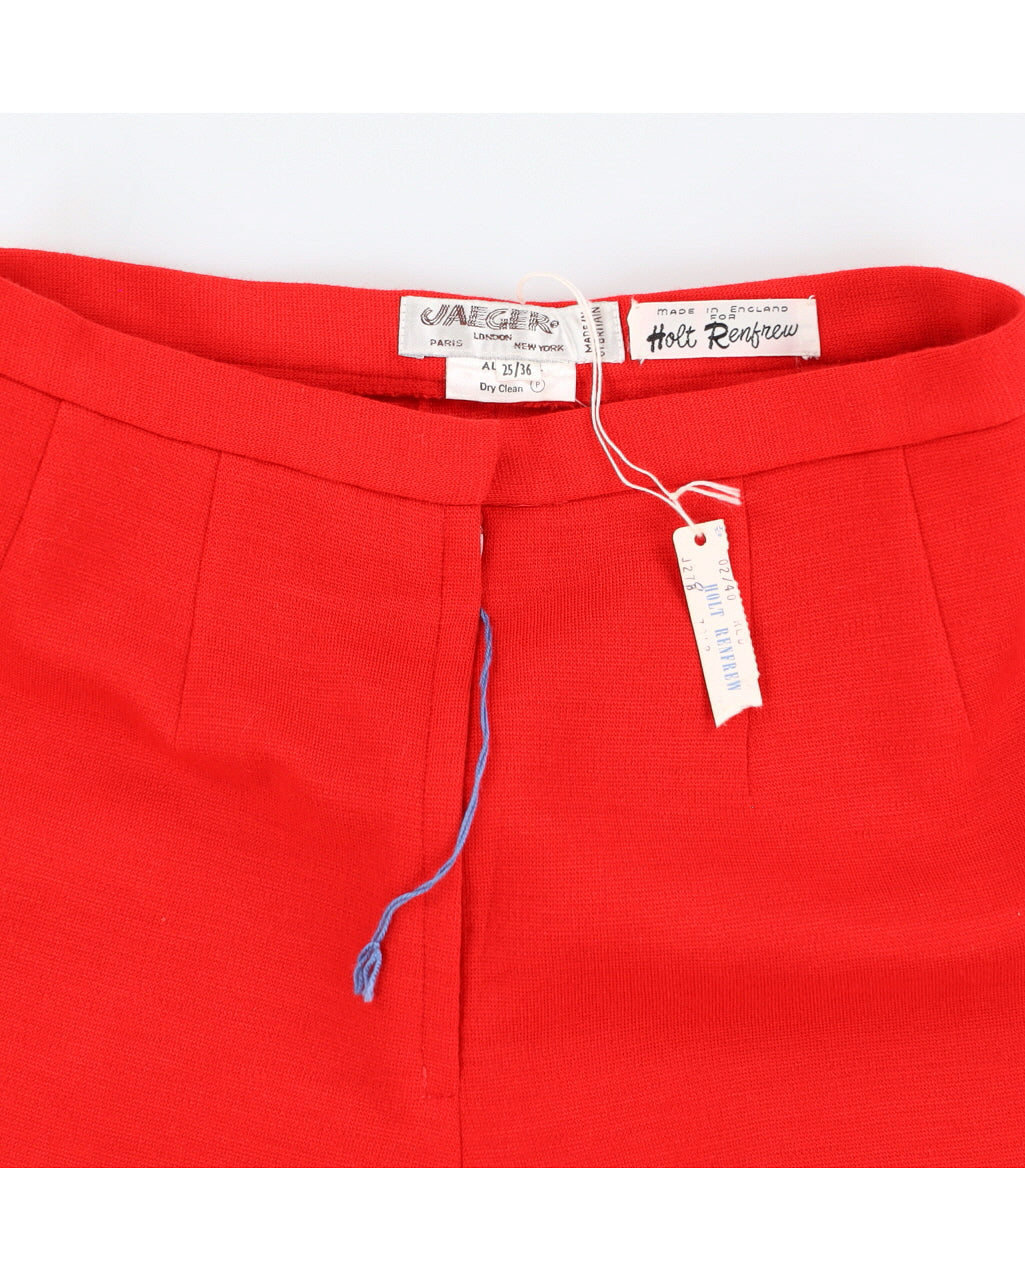 Deadstock 1970s Red Trousers - XS